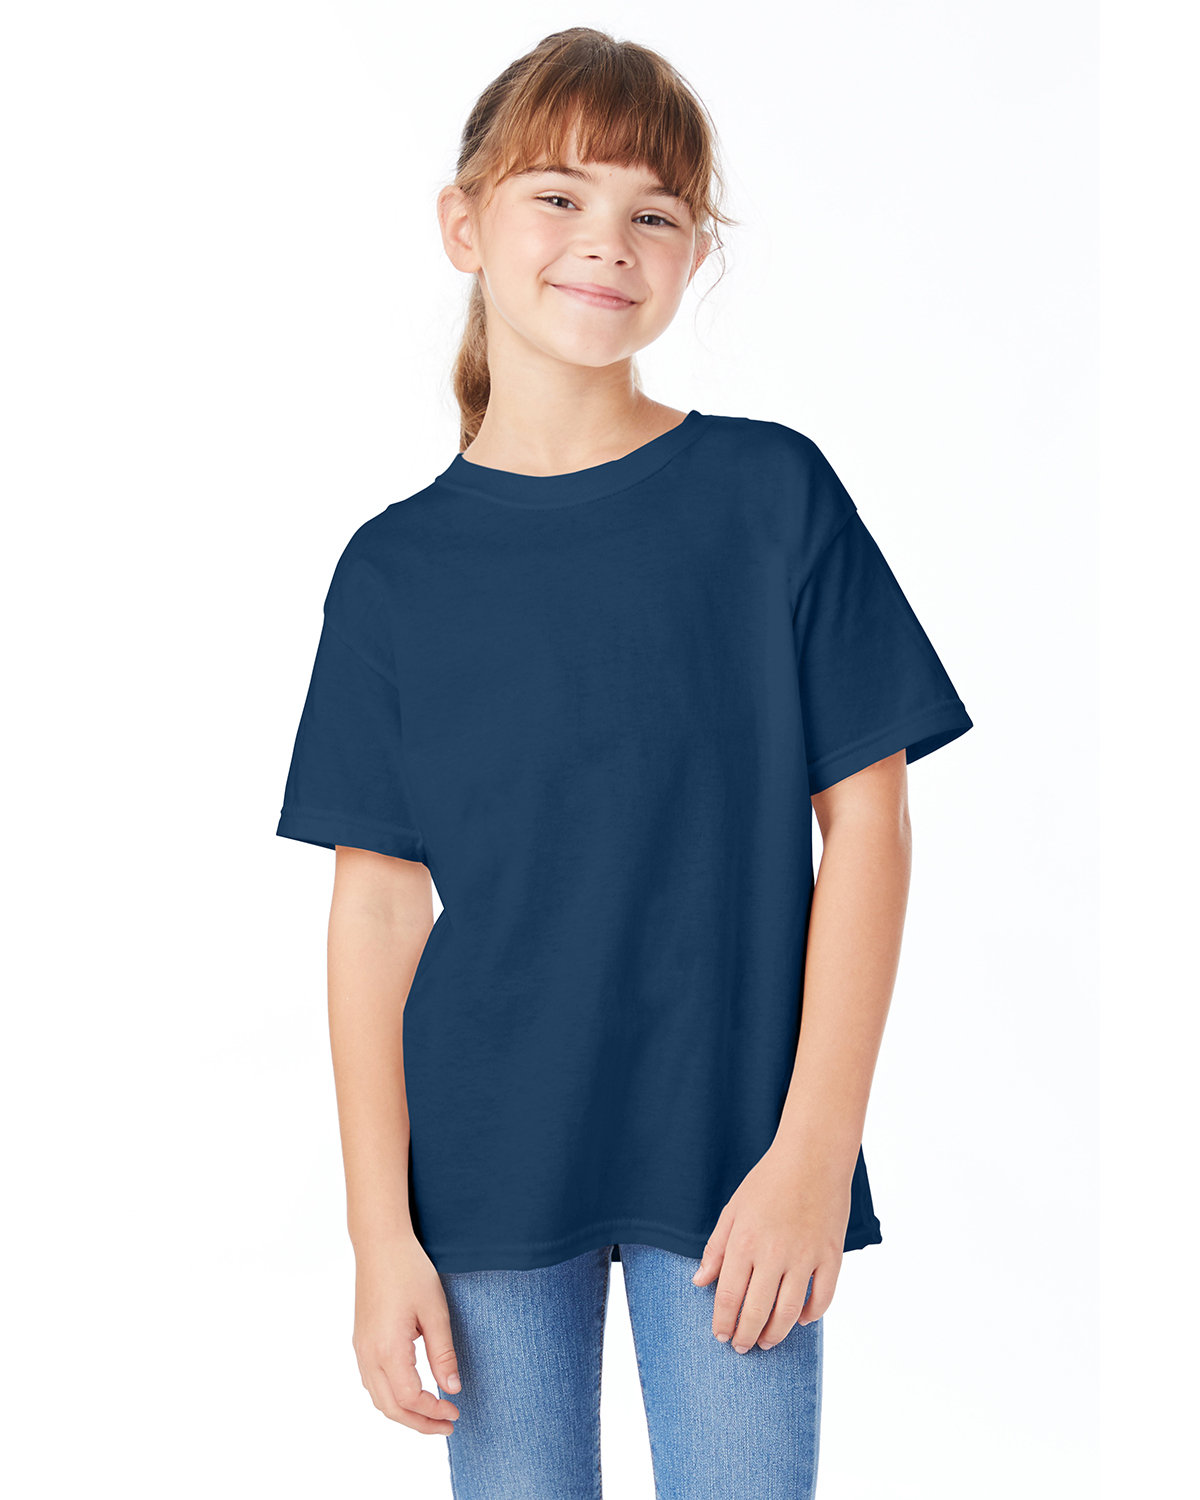 Hanes Youth Essential-T T-Shirt NAVY 